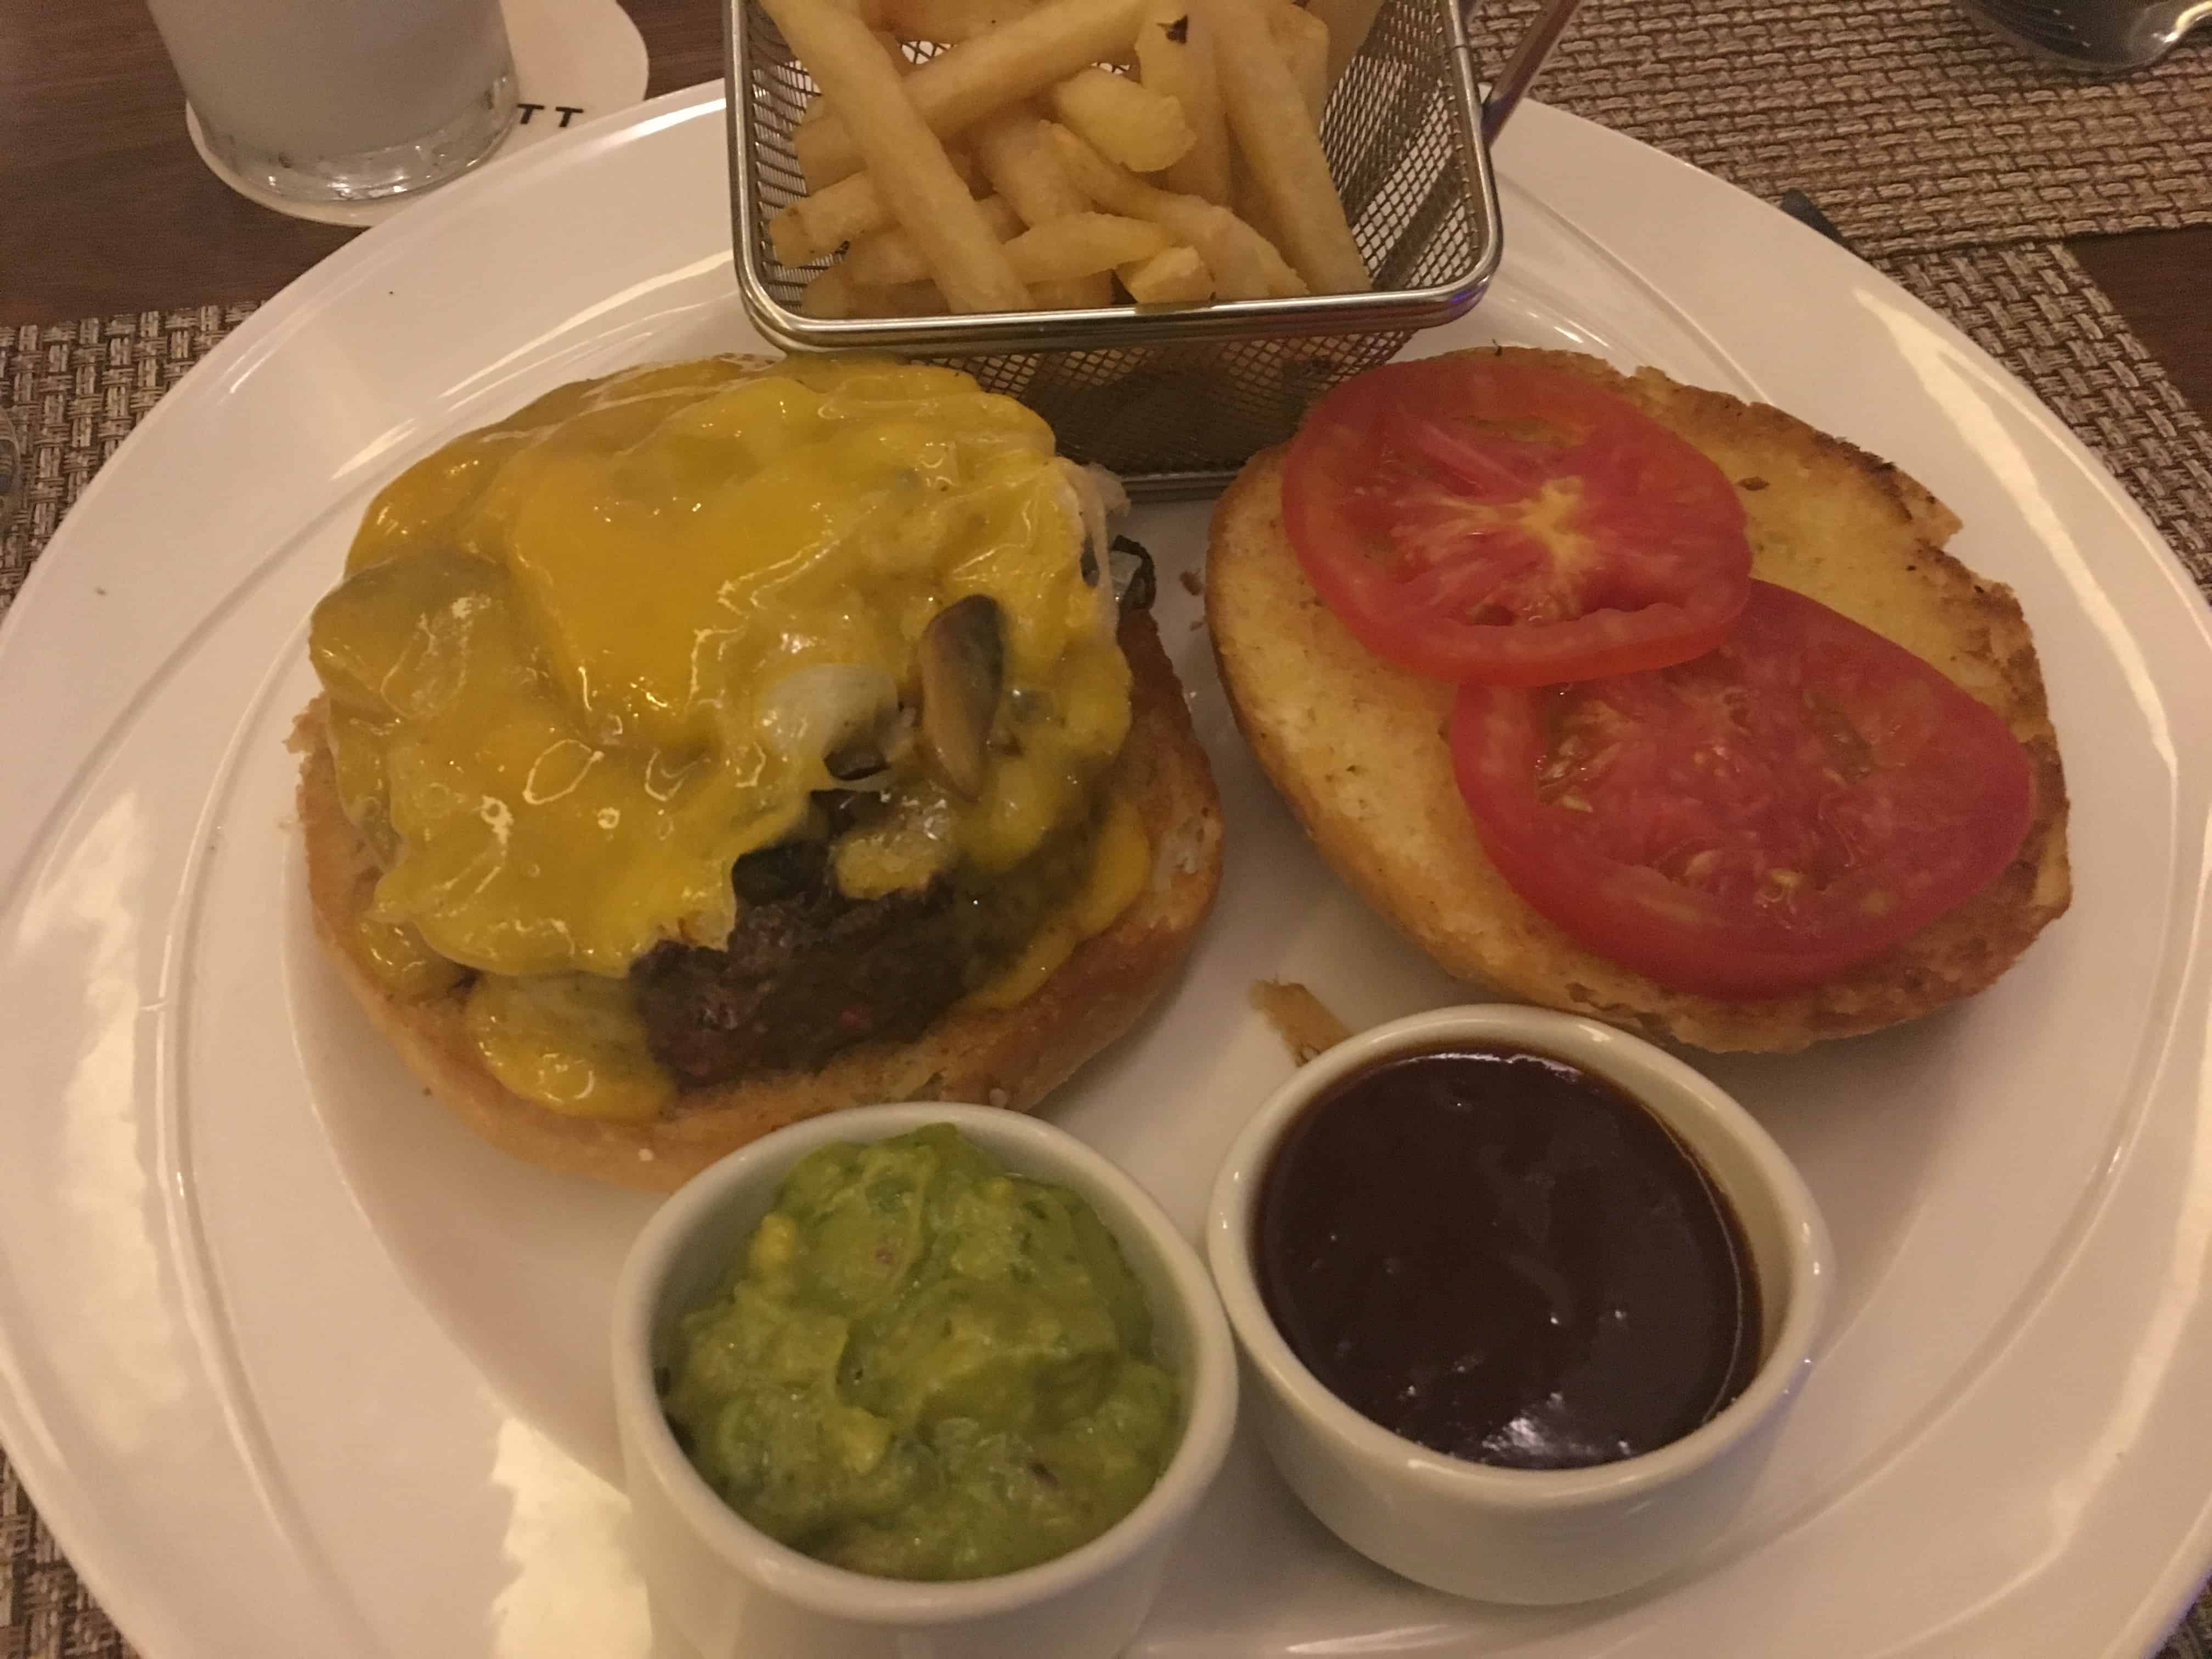 Build your own burger at The Market in Cali, Colombia